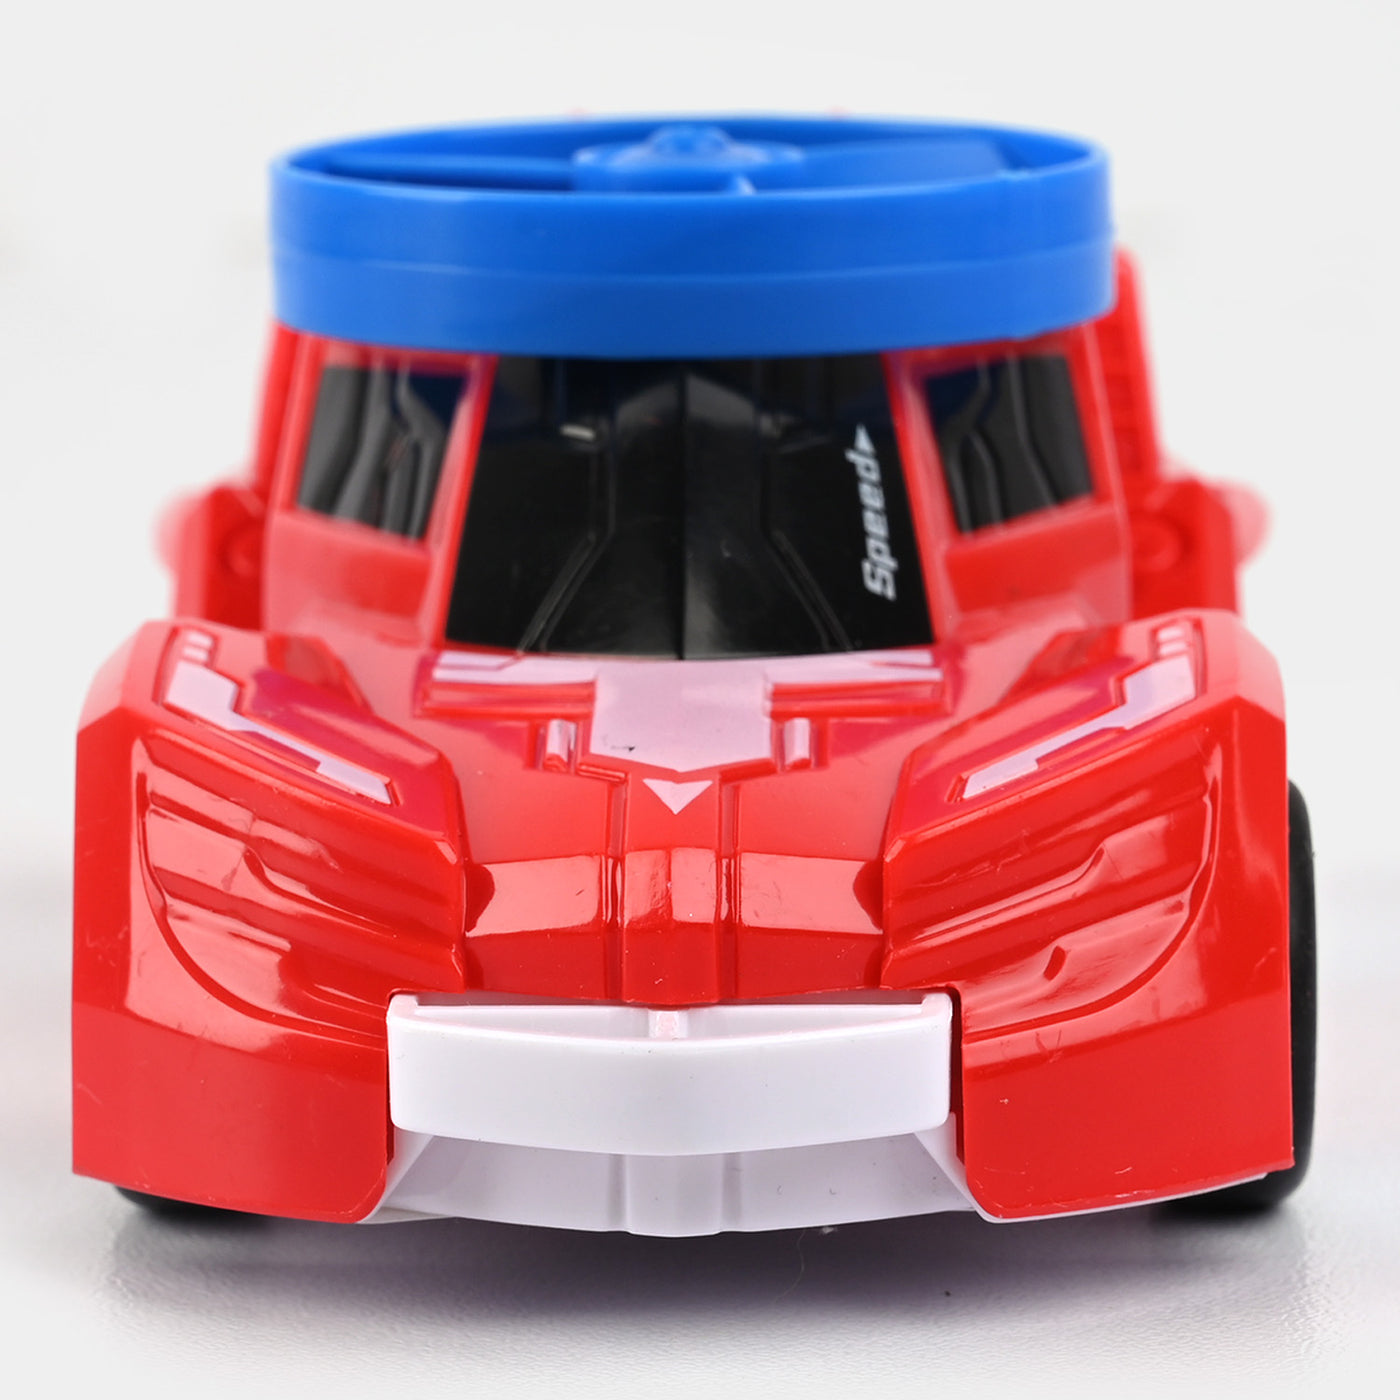 Friction Mini Fly Fan Car Counter Toy For Kids